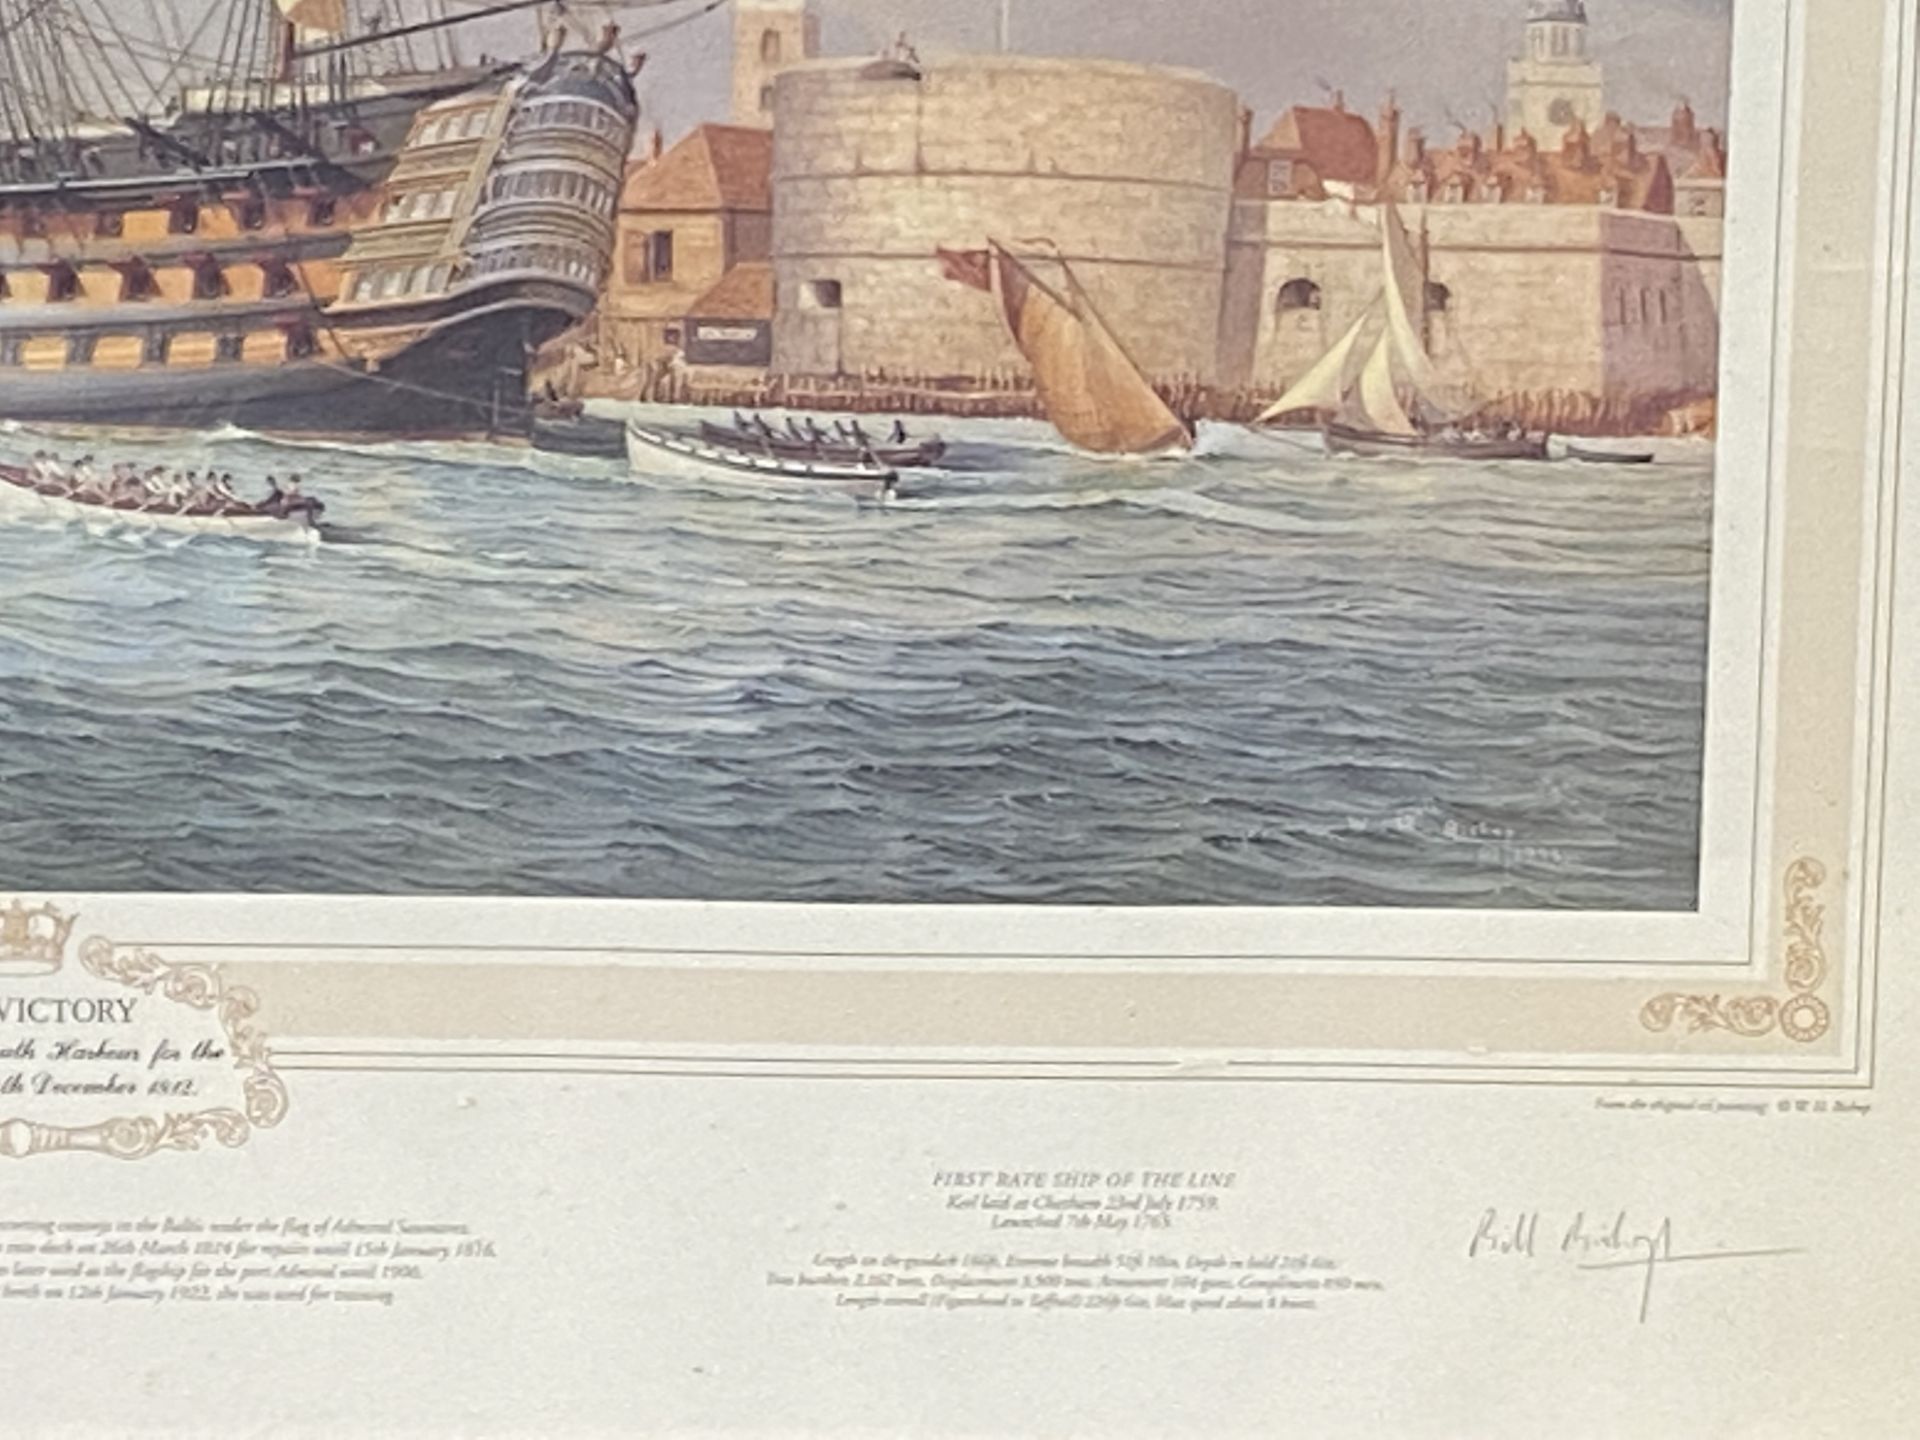 Framed and glazed print of HMS Victory - Image 3 of 4